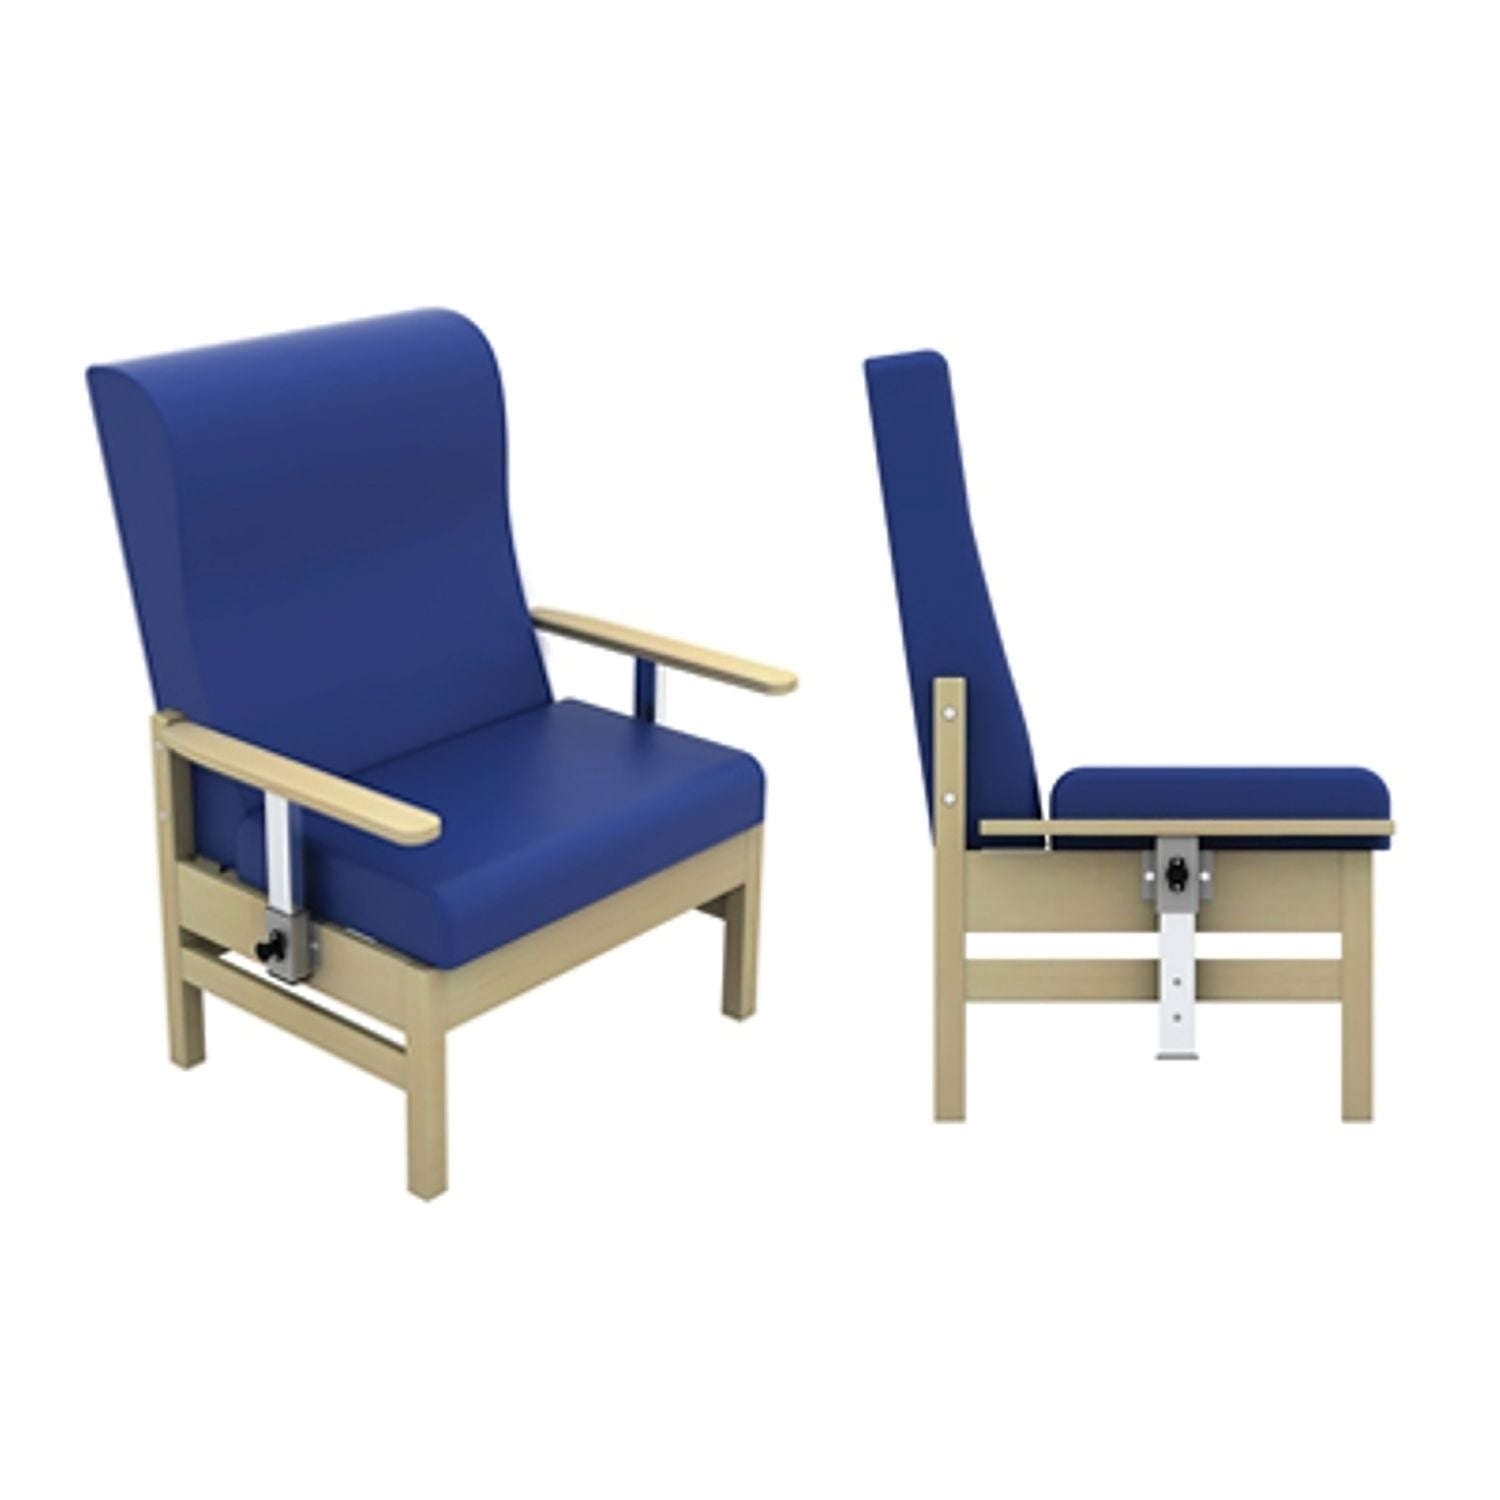 Bariatric Patient Armchair | High Back, Wings & Drop Arms | Intevene Anti-bacterial Upholstery